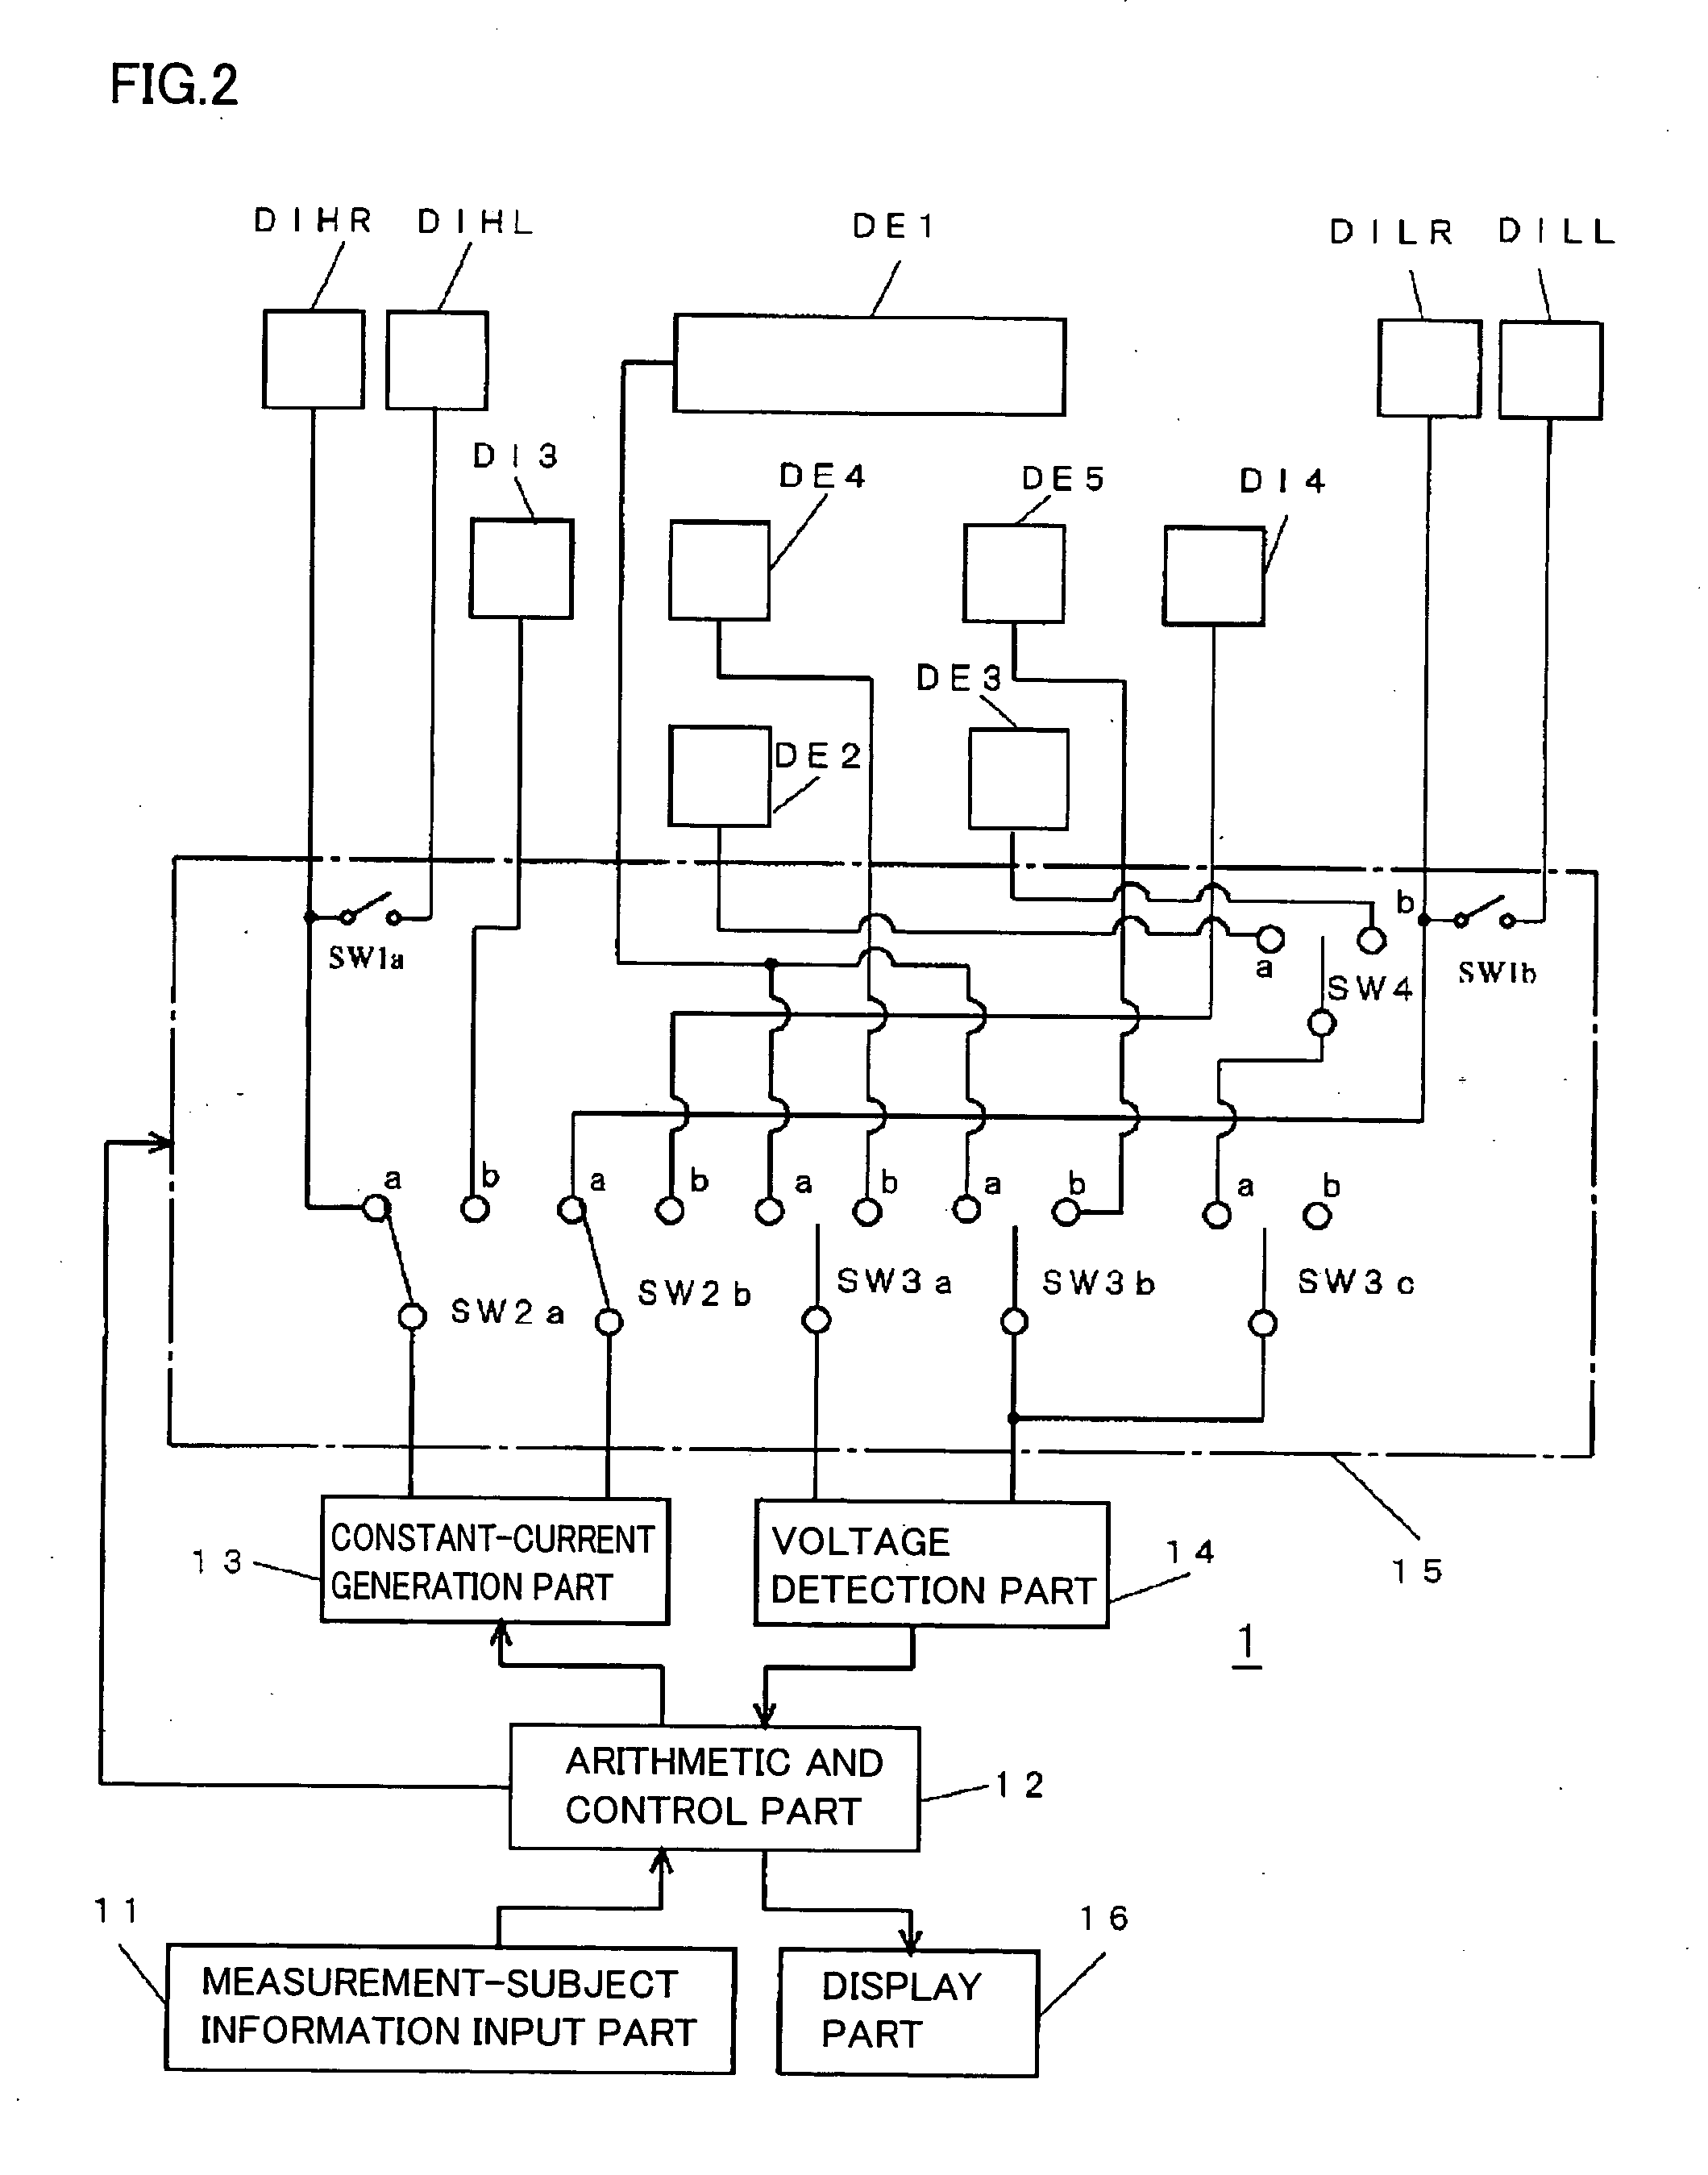 Body fat measuring apparatus capable of measuring visceral fat with high accuracy